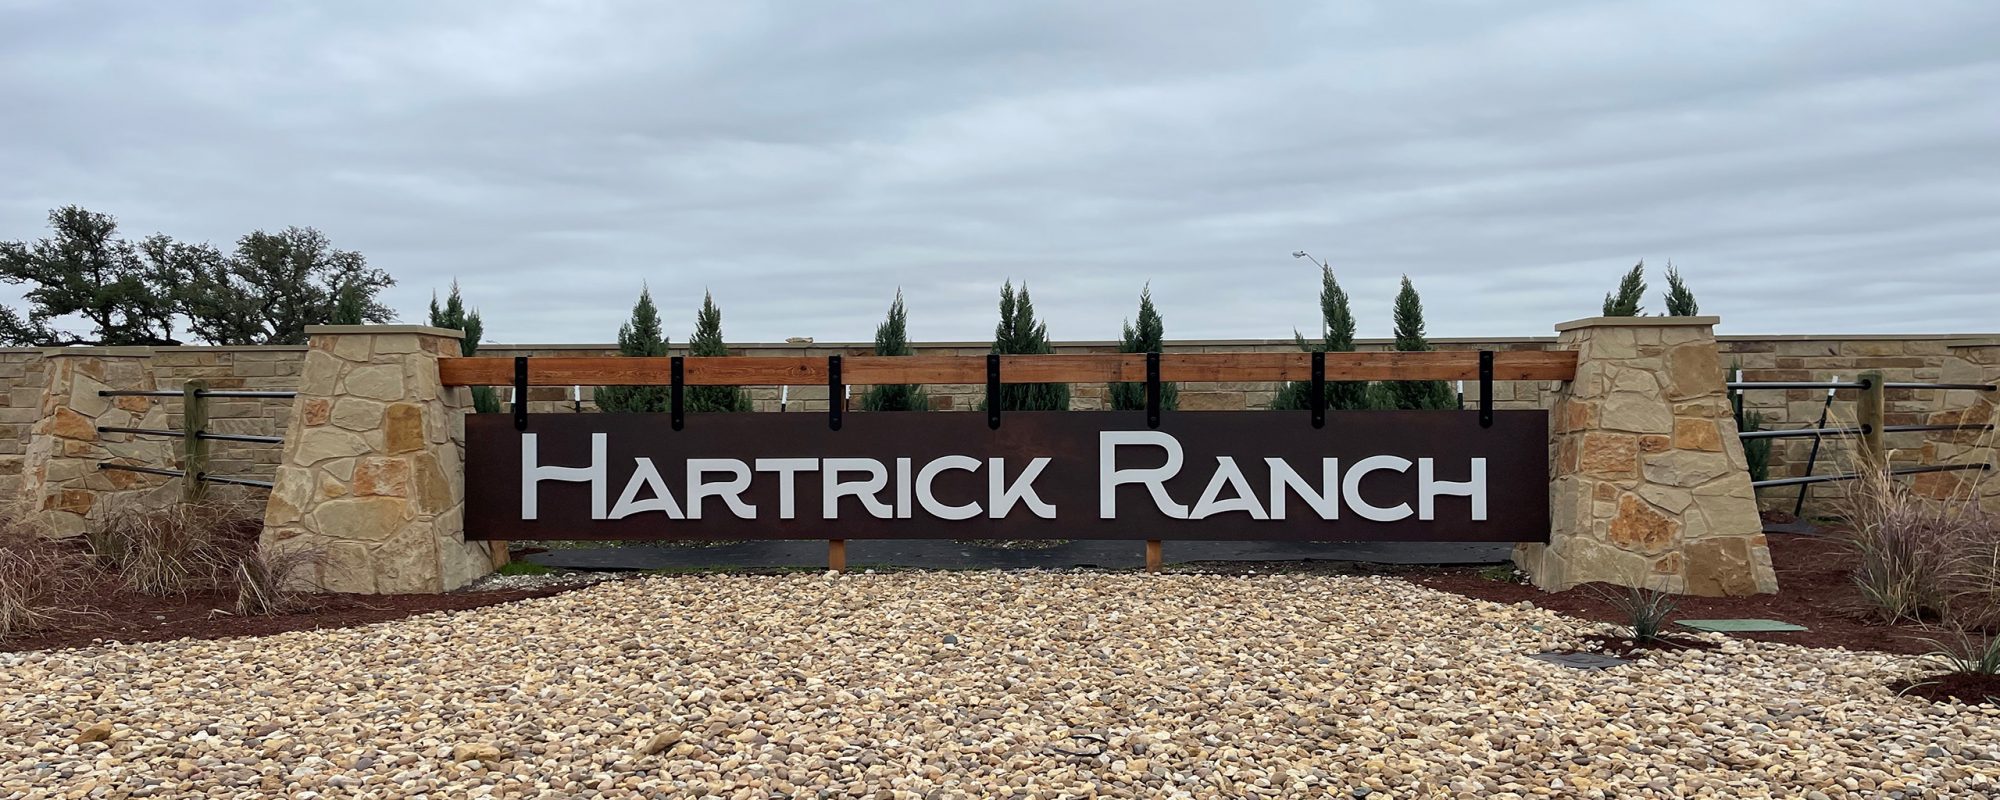 hartrick-ranch-3